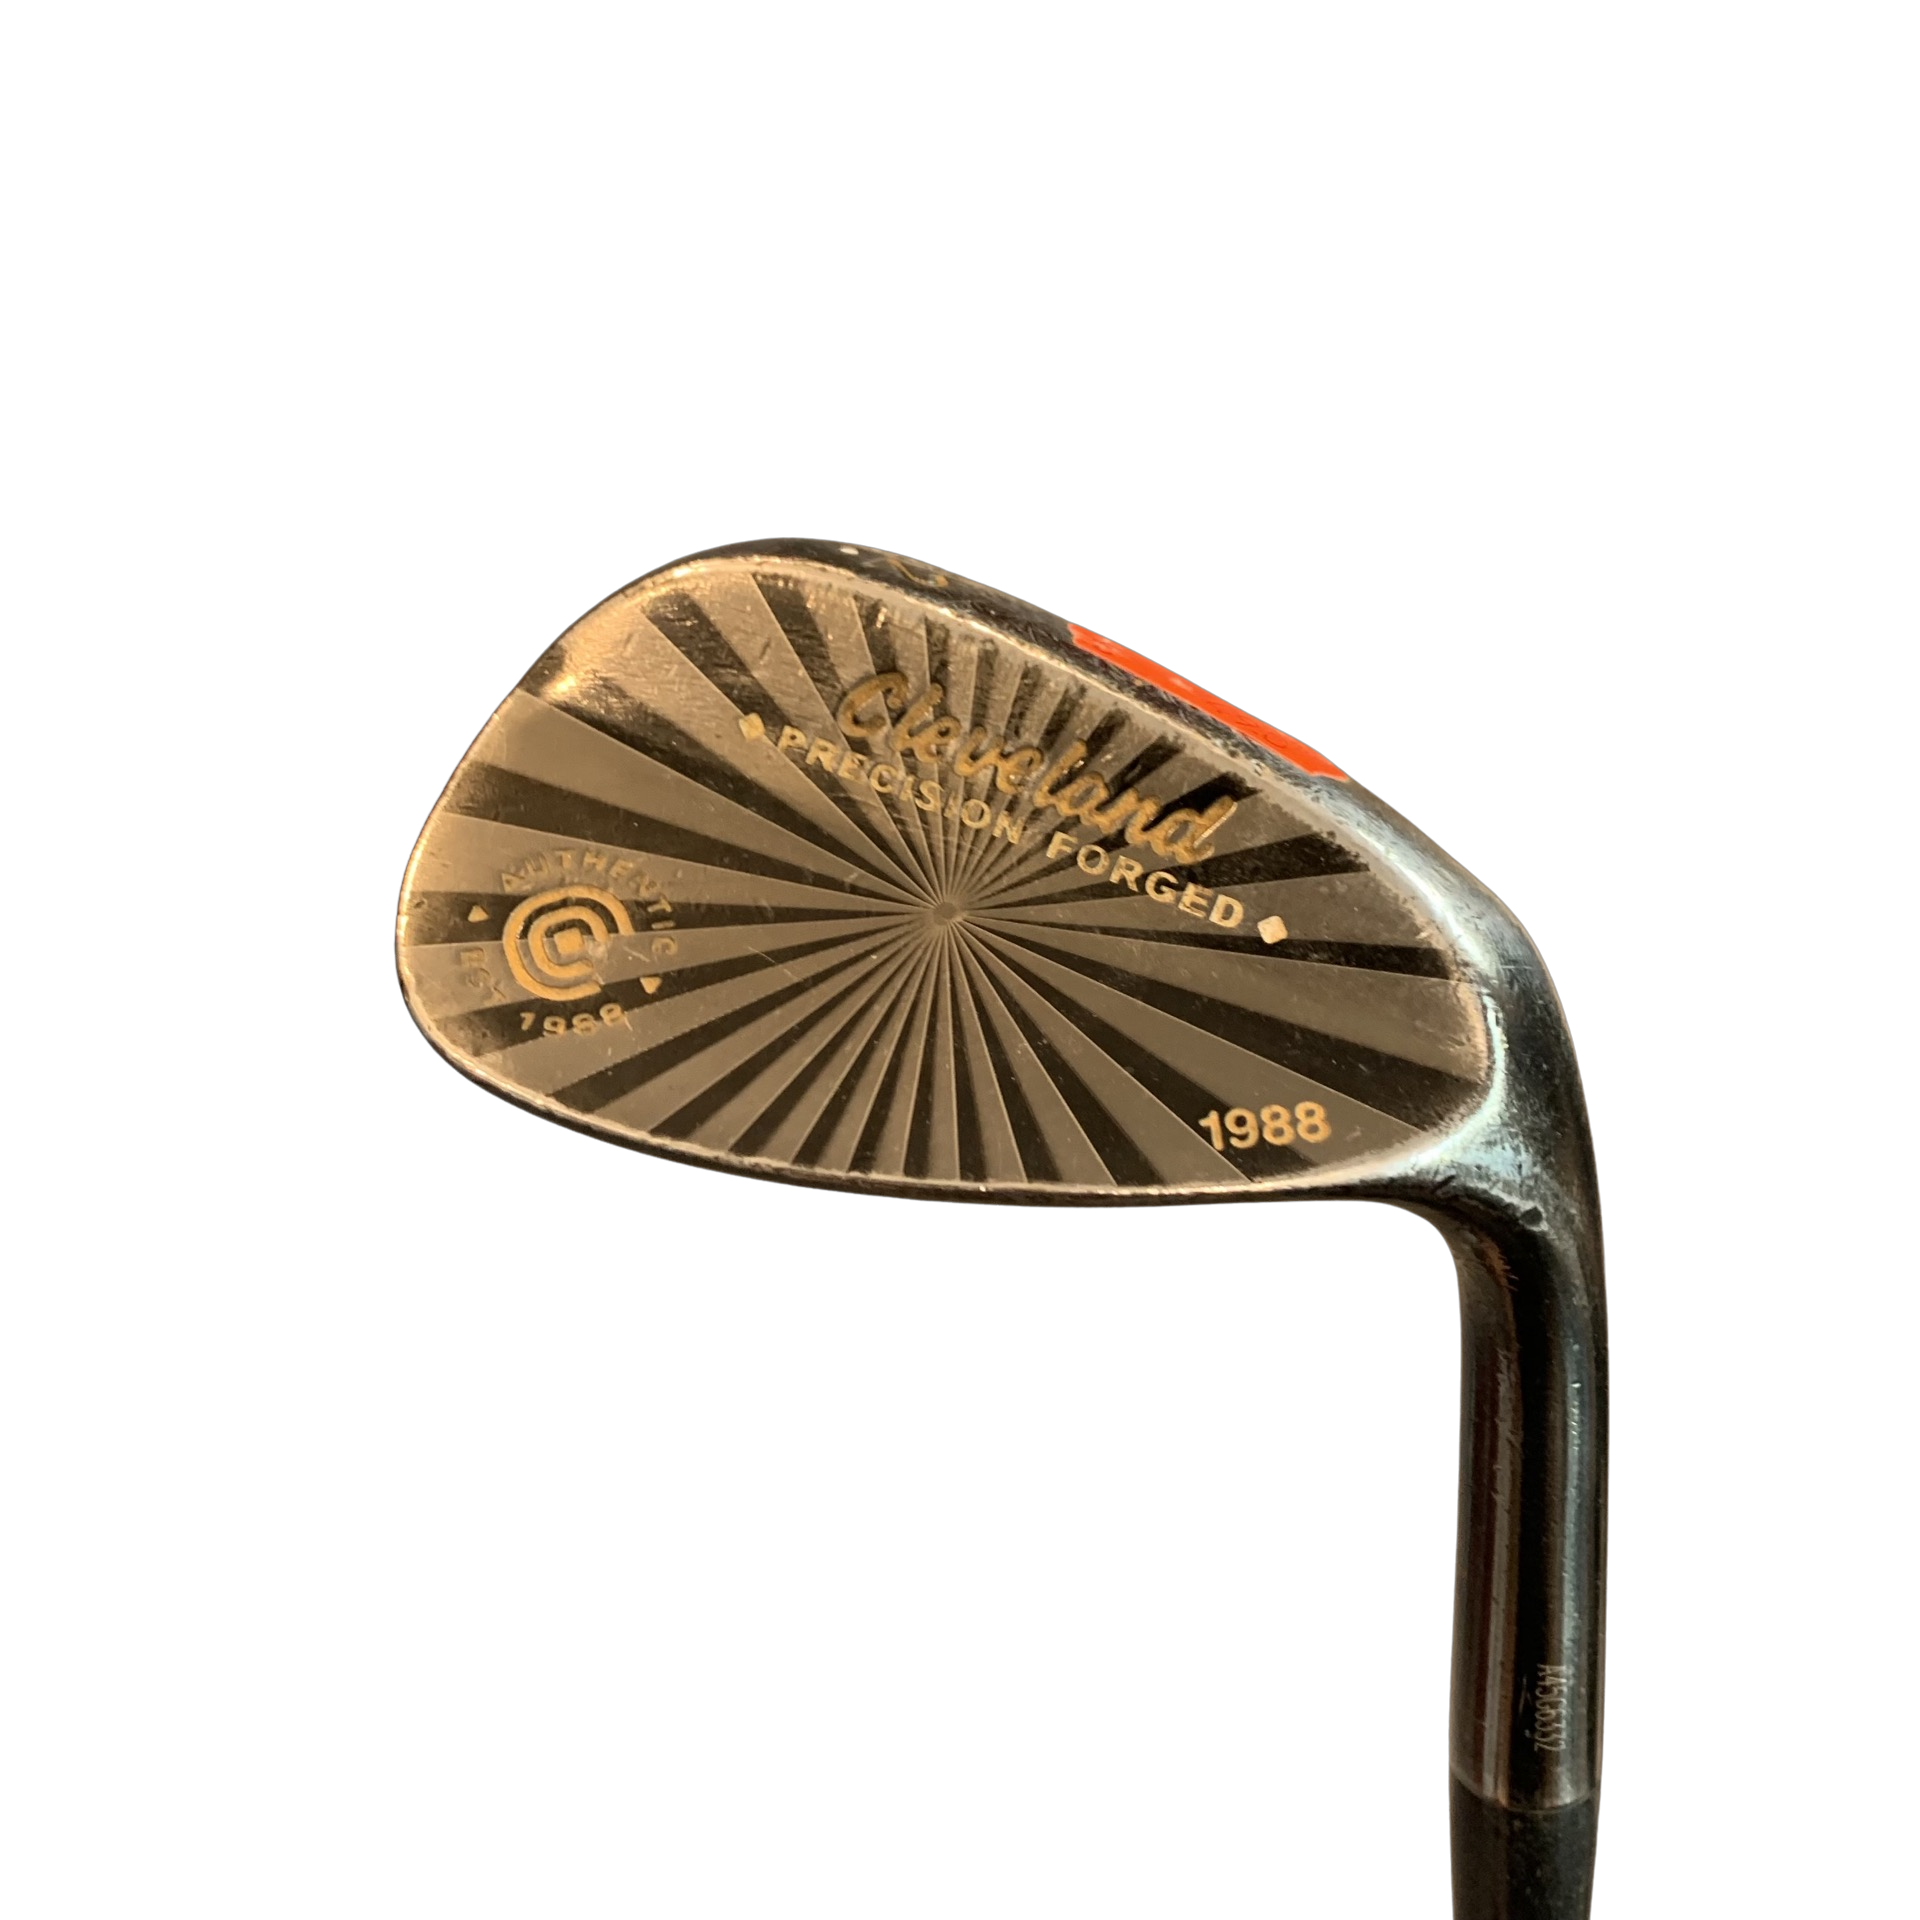 CLEVELAND - WEDGE AUTHENTIC